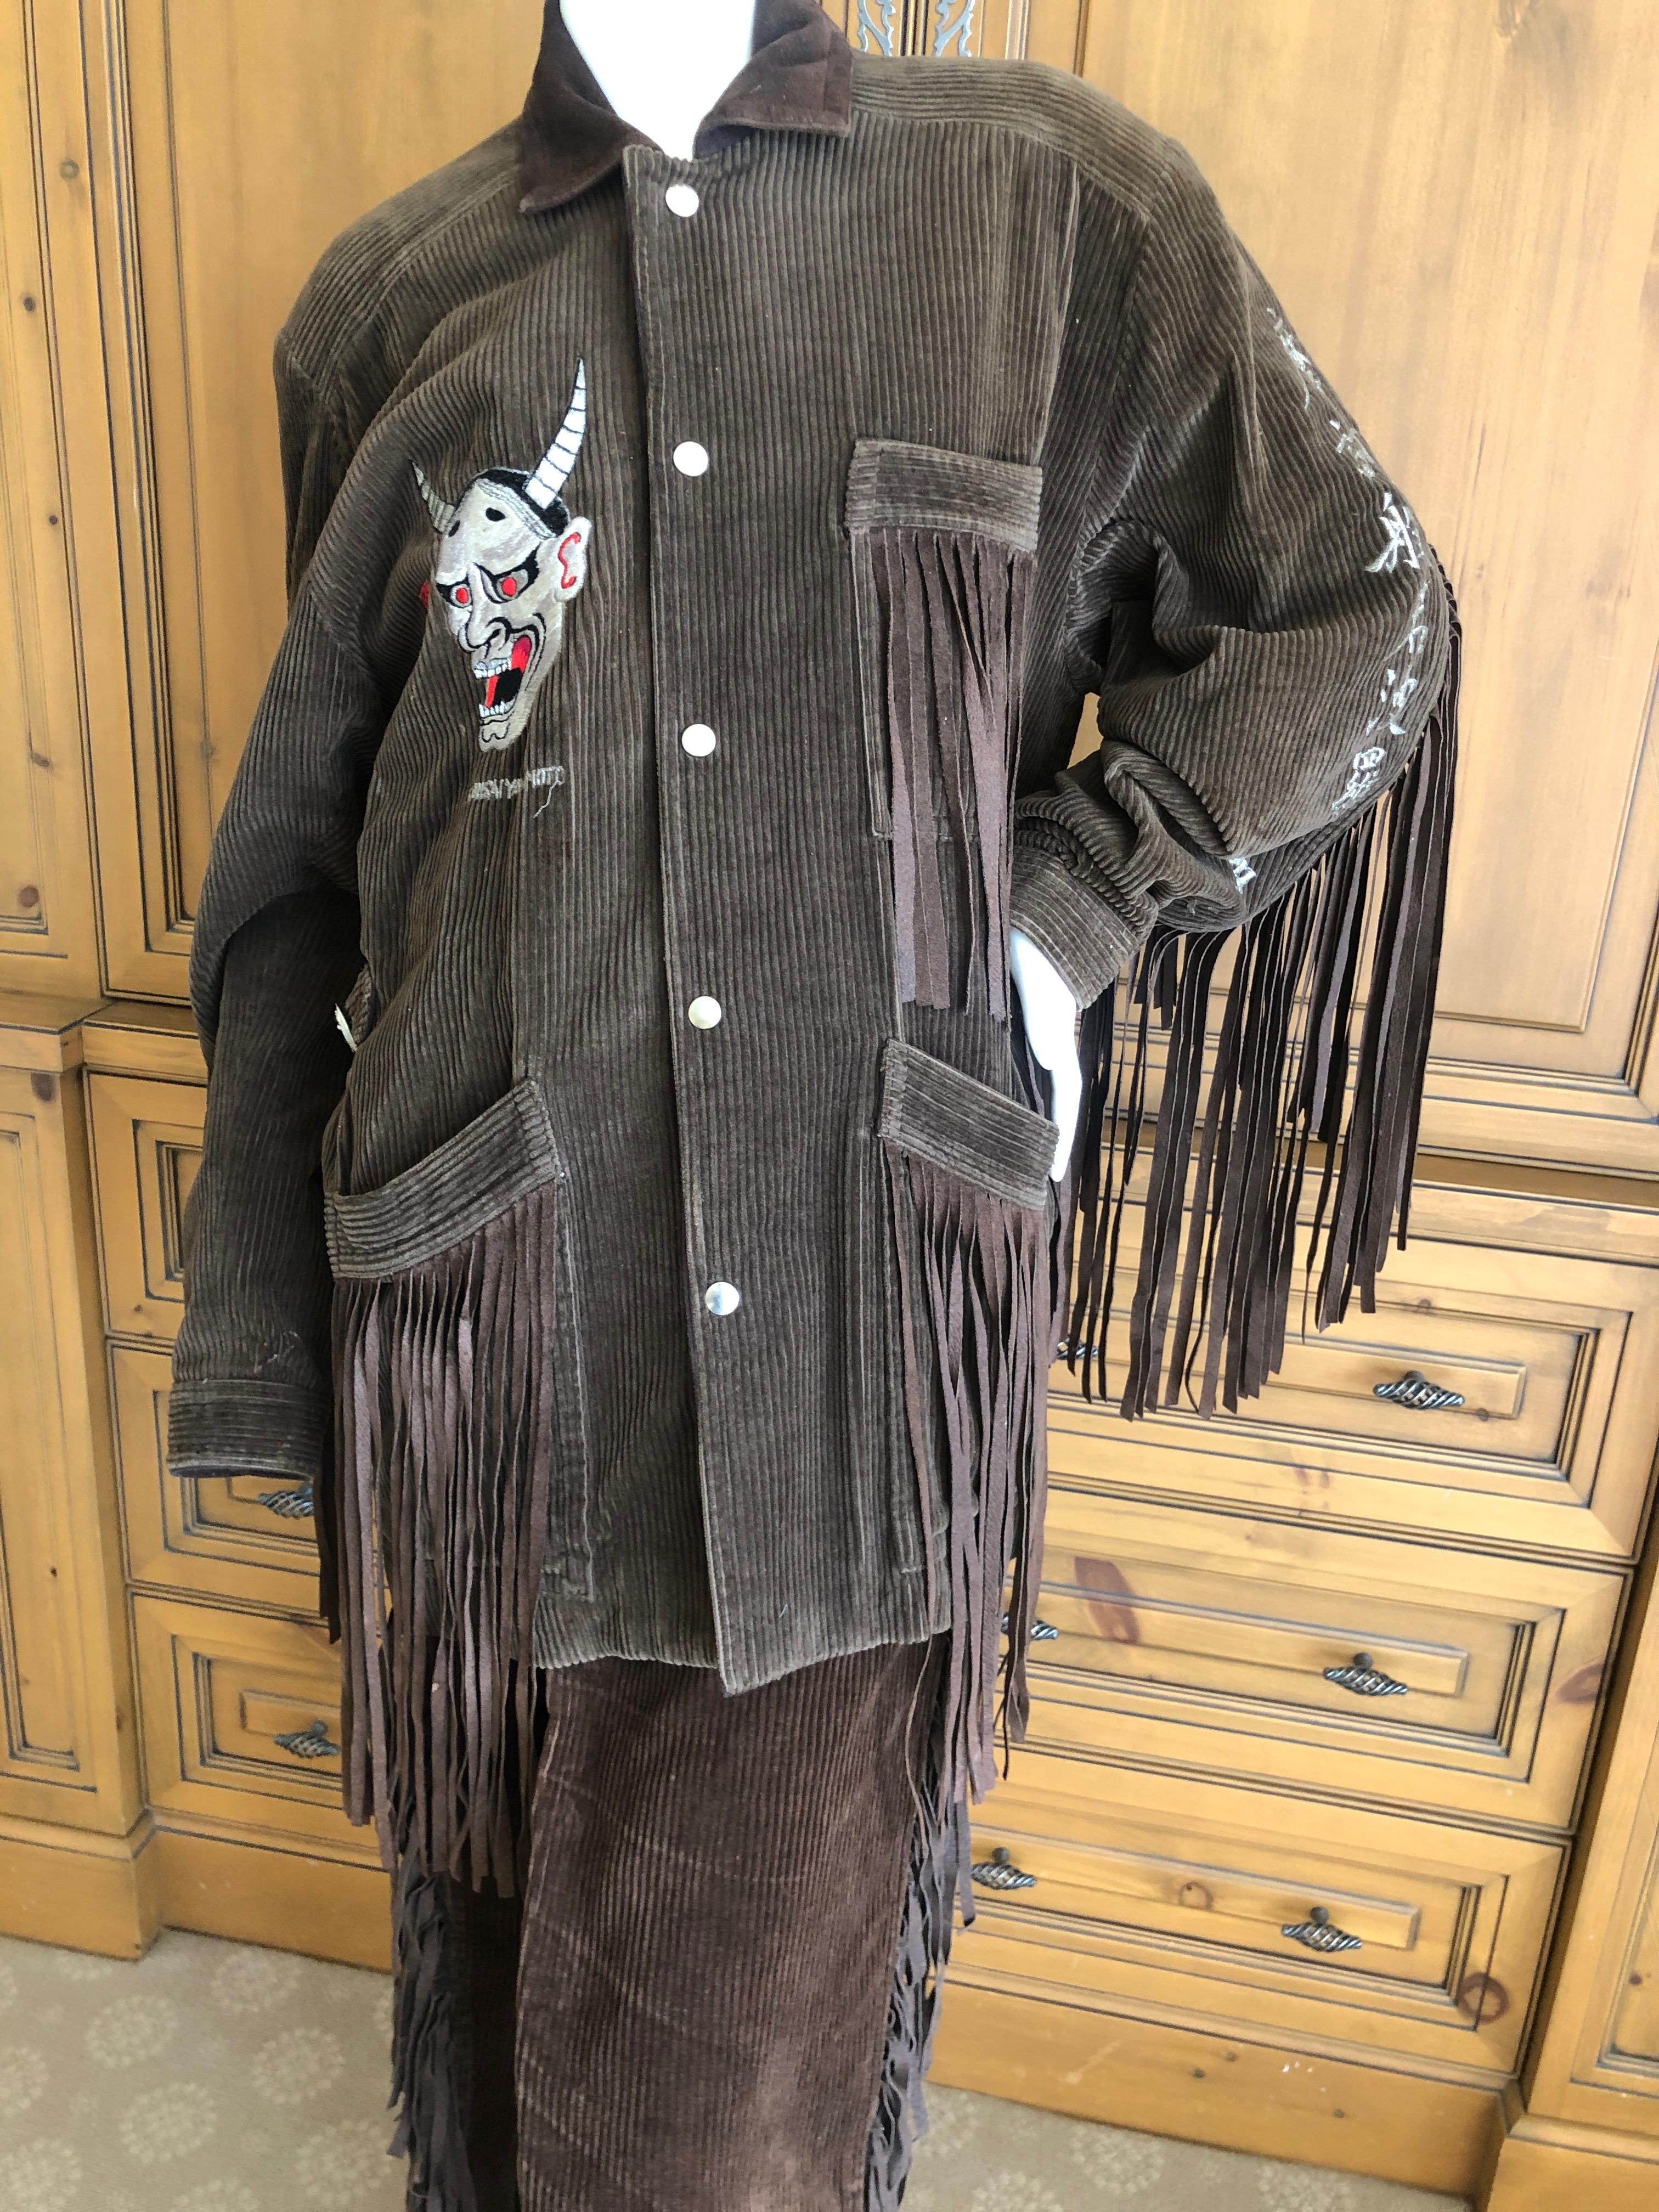 KANSAI YAMAMOTO 1981 Rare Collectible Unisex Embellished Jacket w Suede Fringe In Excellent Condition For Sale In Cloverdale, CA